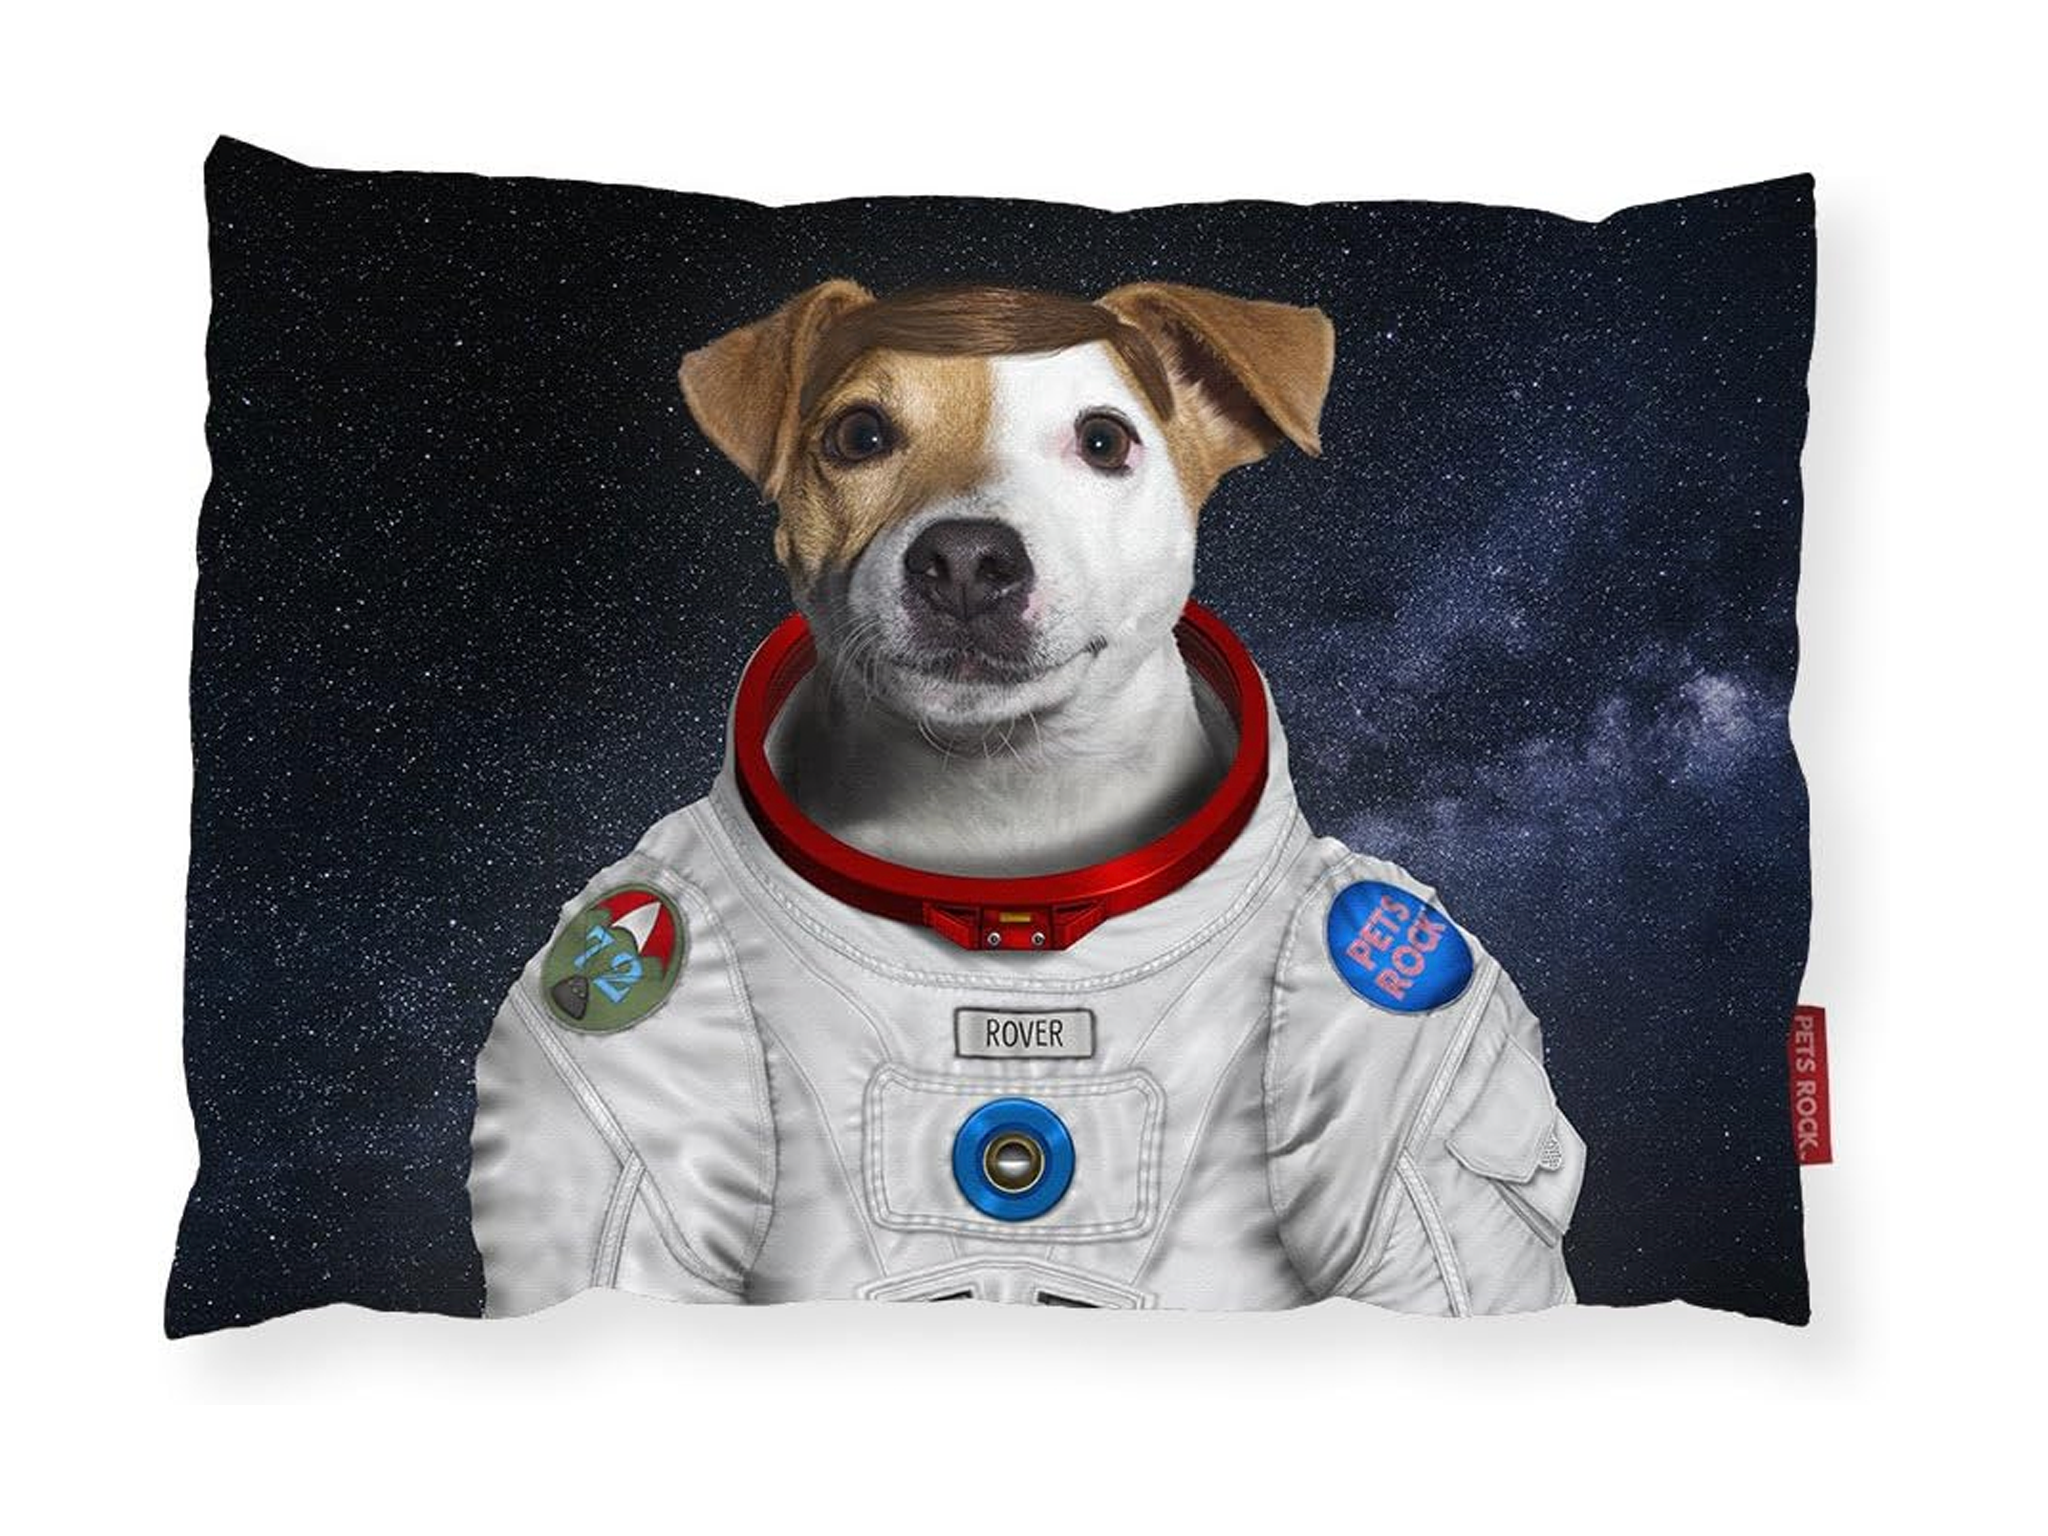 We-love-cushions-best-dog-beds-review-indybest